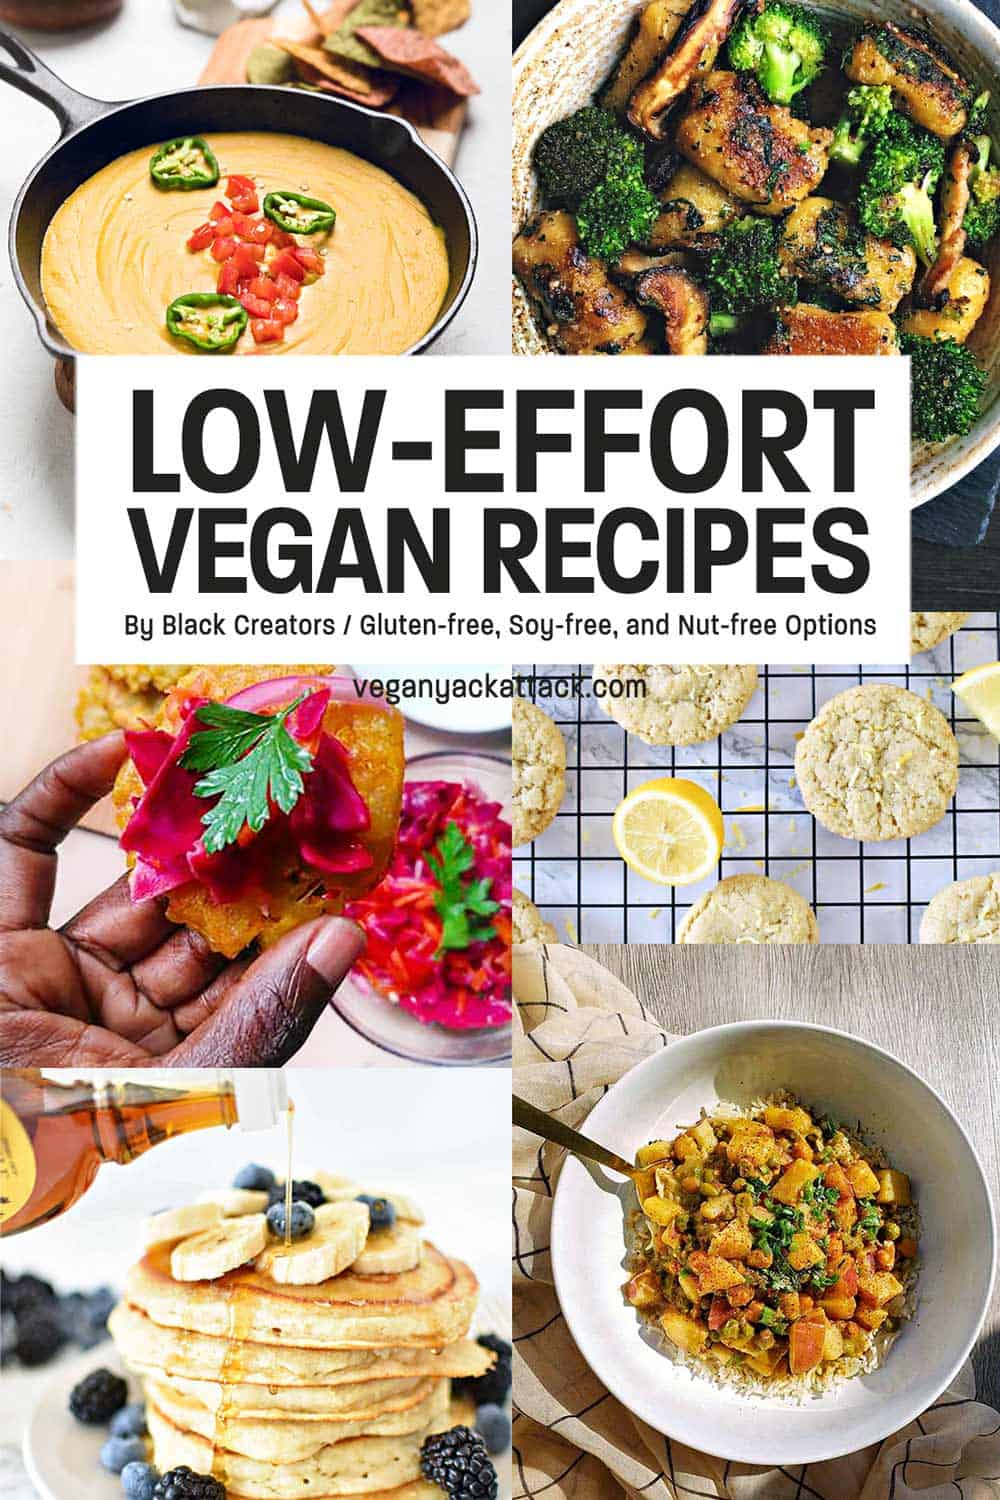 Image collage of Vegan Recipes with text overlay reading "Low-Effort Vegan Recipes"